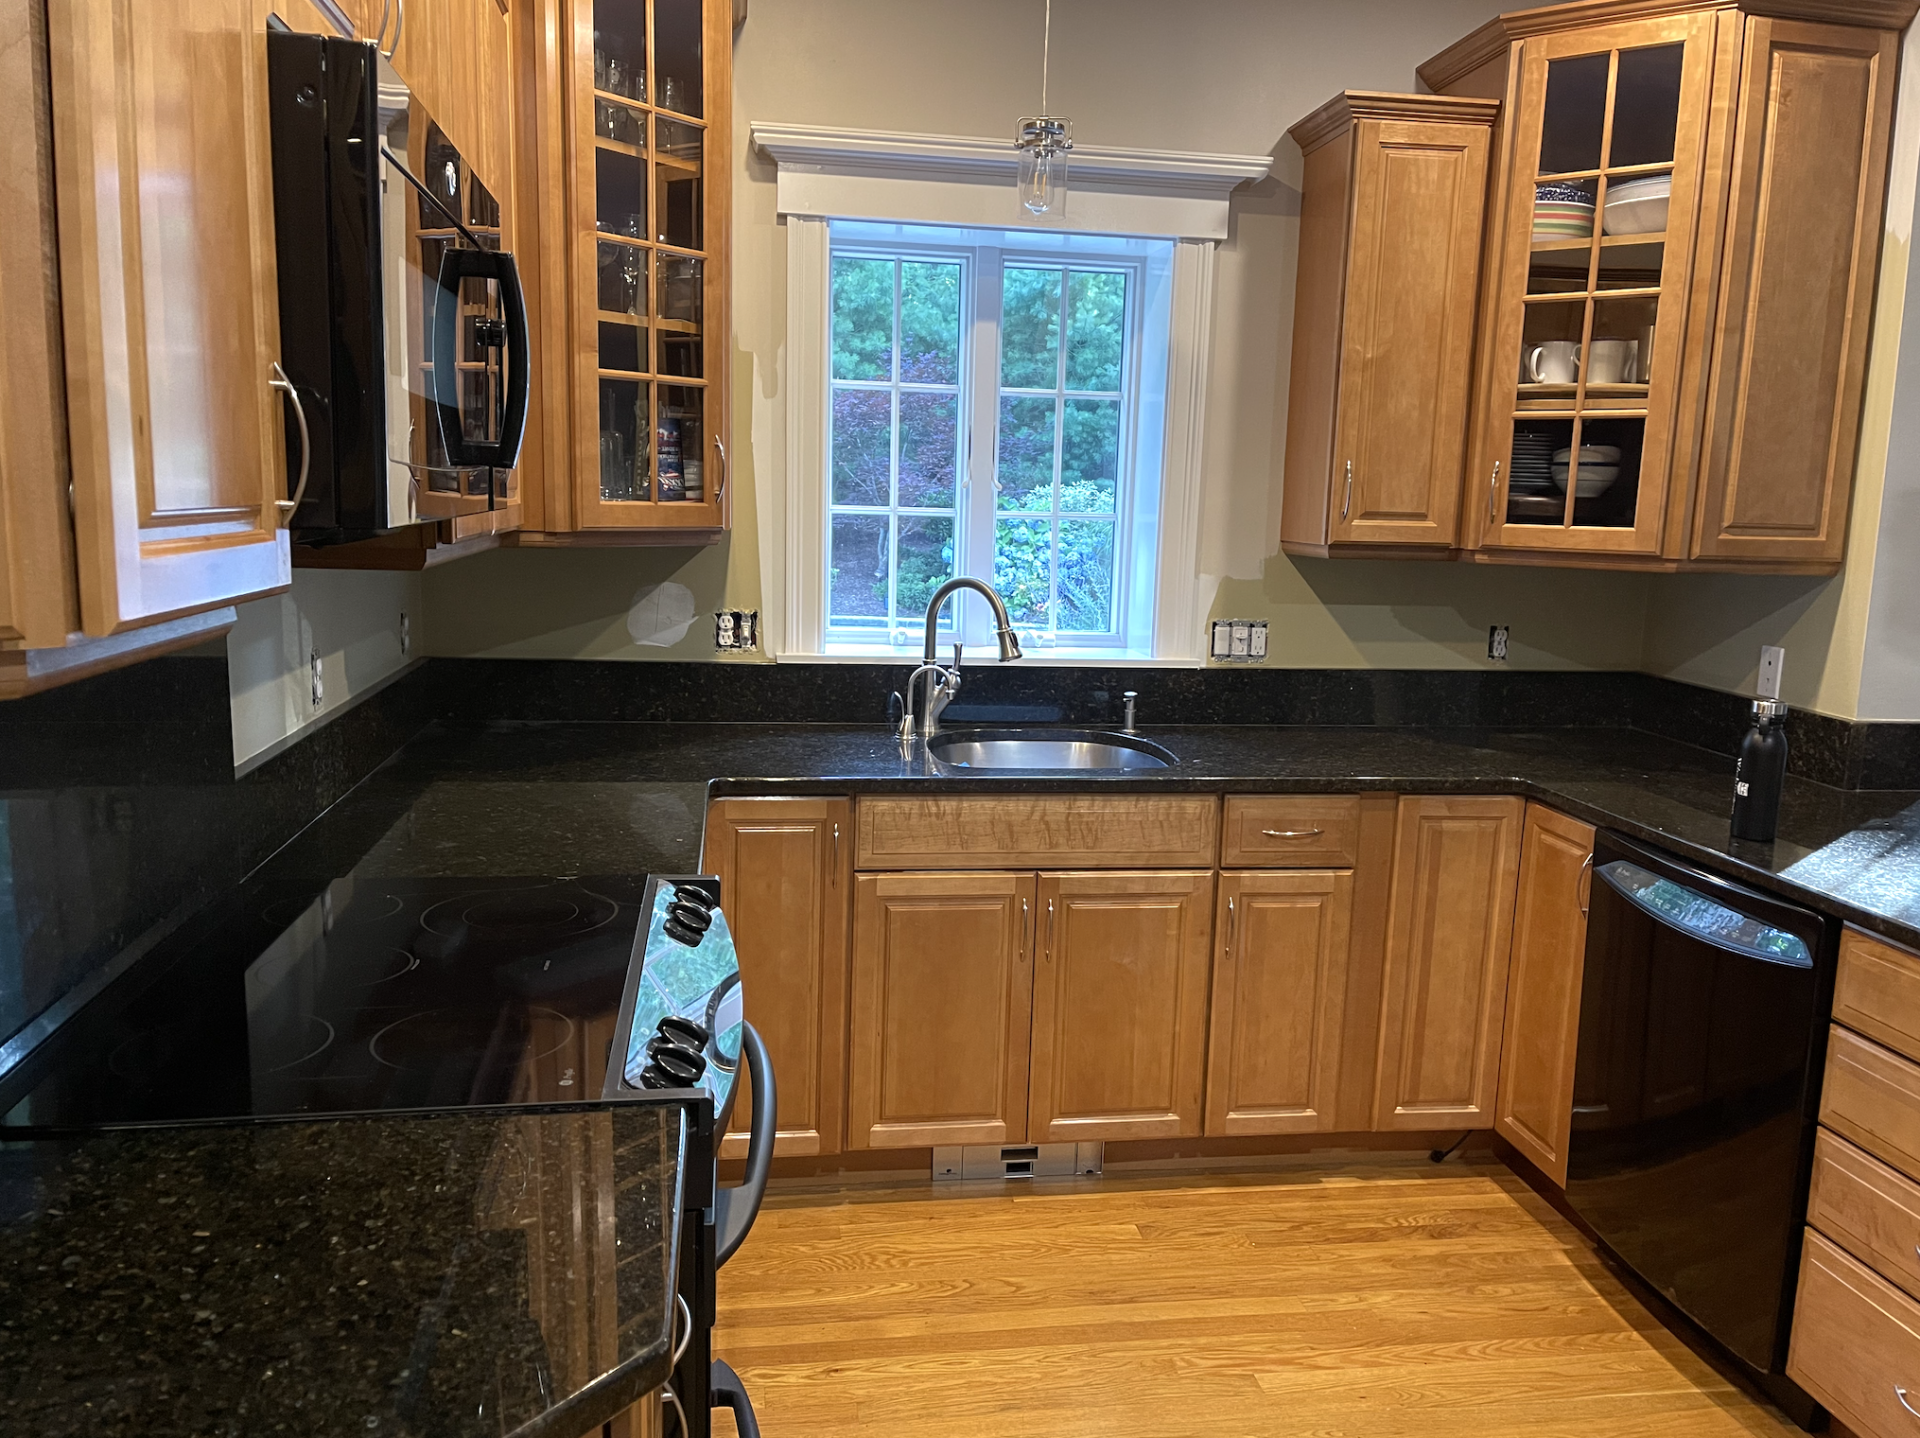 Cherry cabinets with black granite counter in kitchen